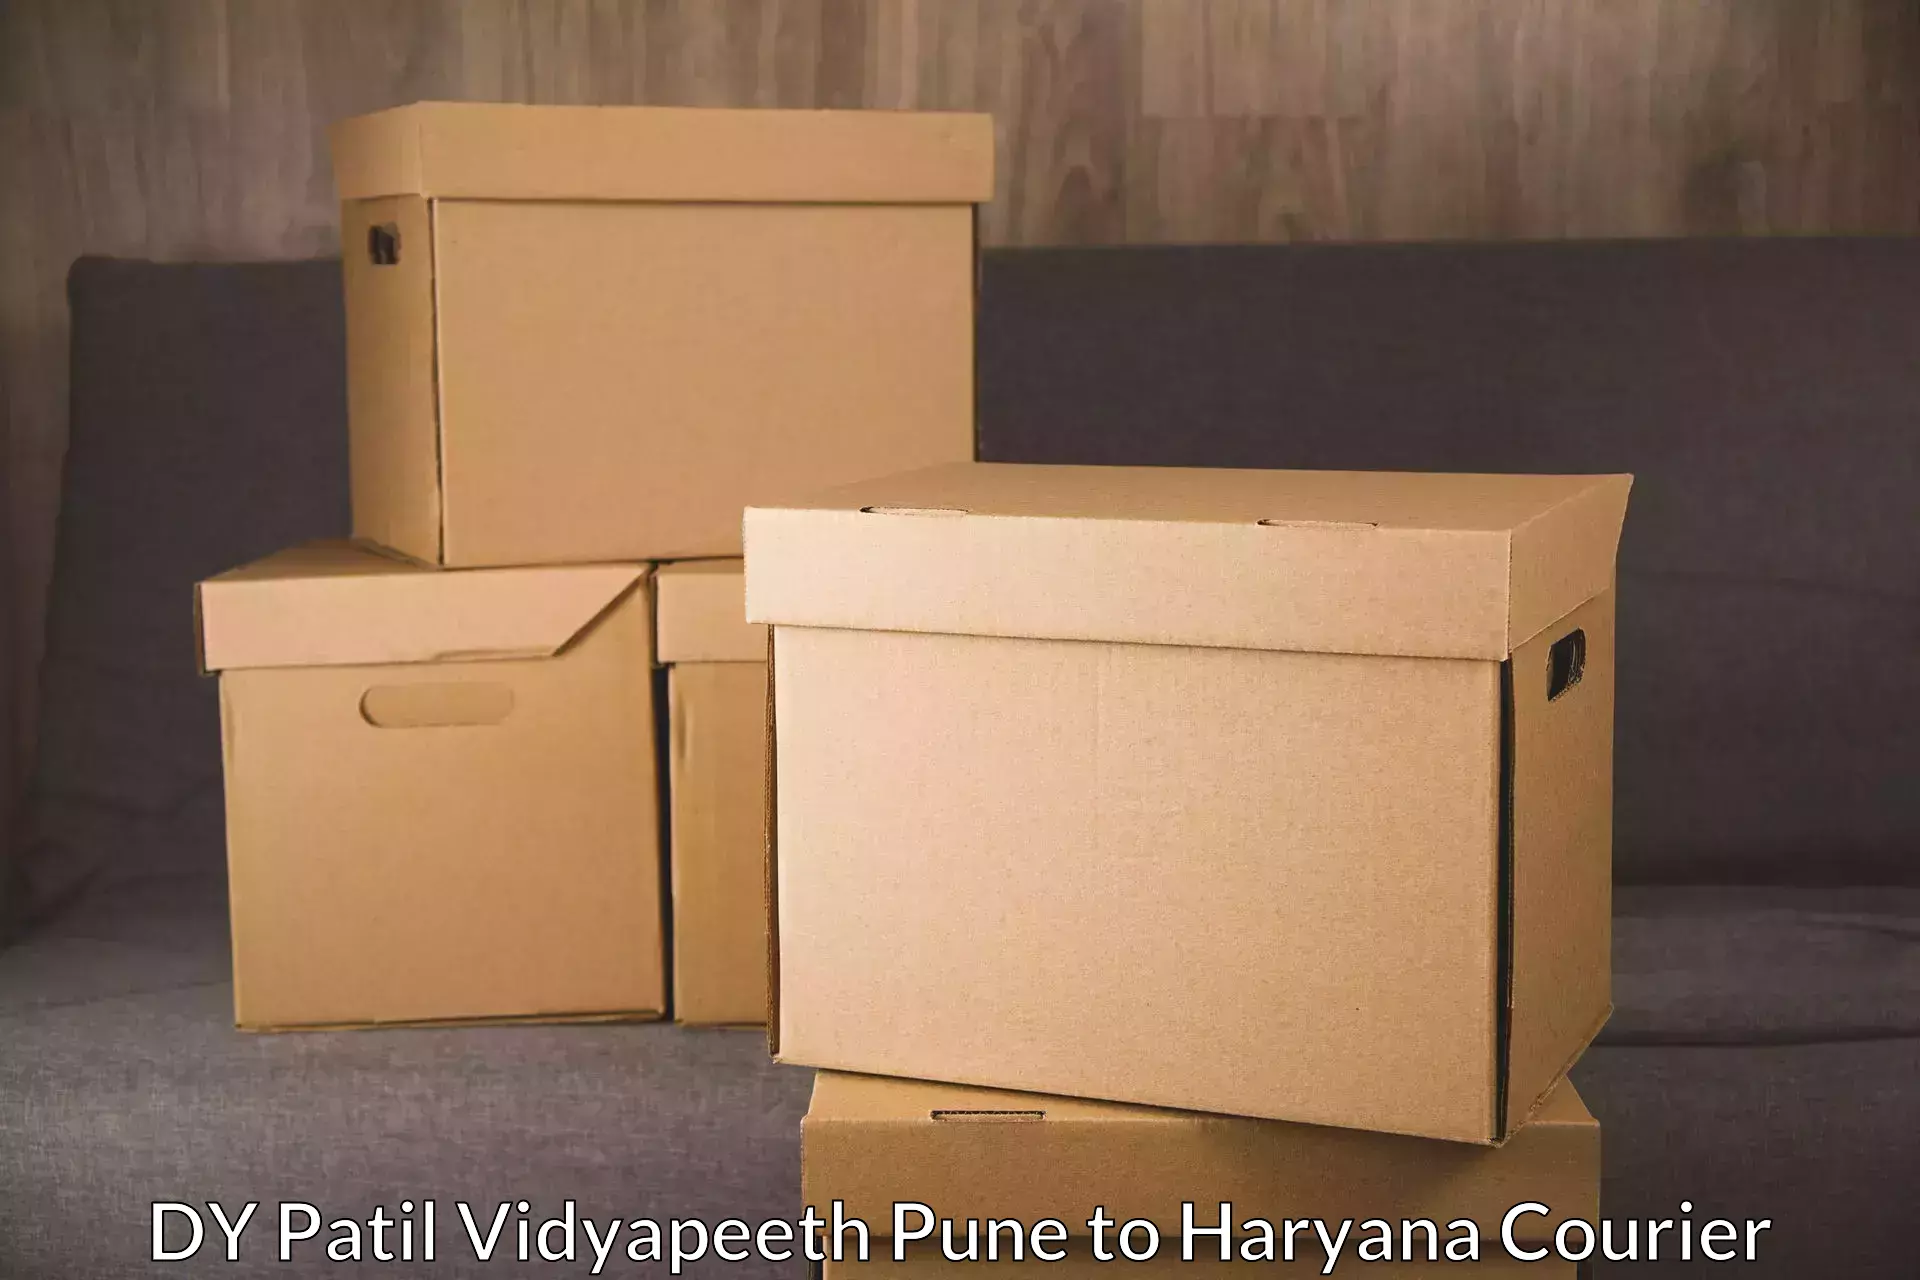 Nationwide courier service DY Patil Vidyapeeth Pune to Bahadurgarh